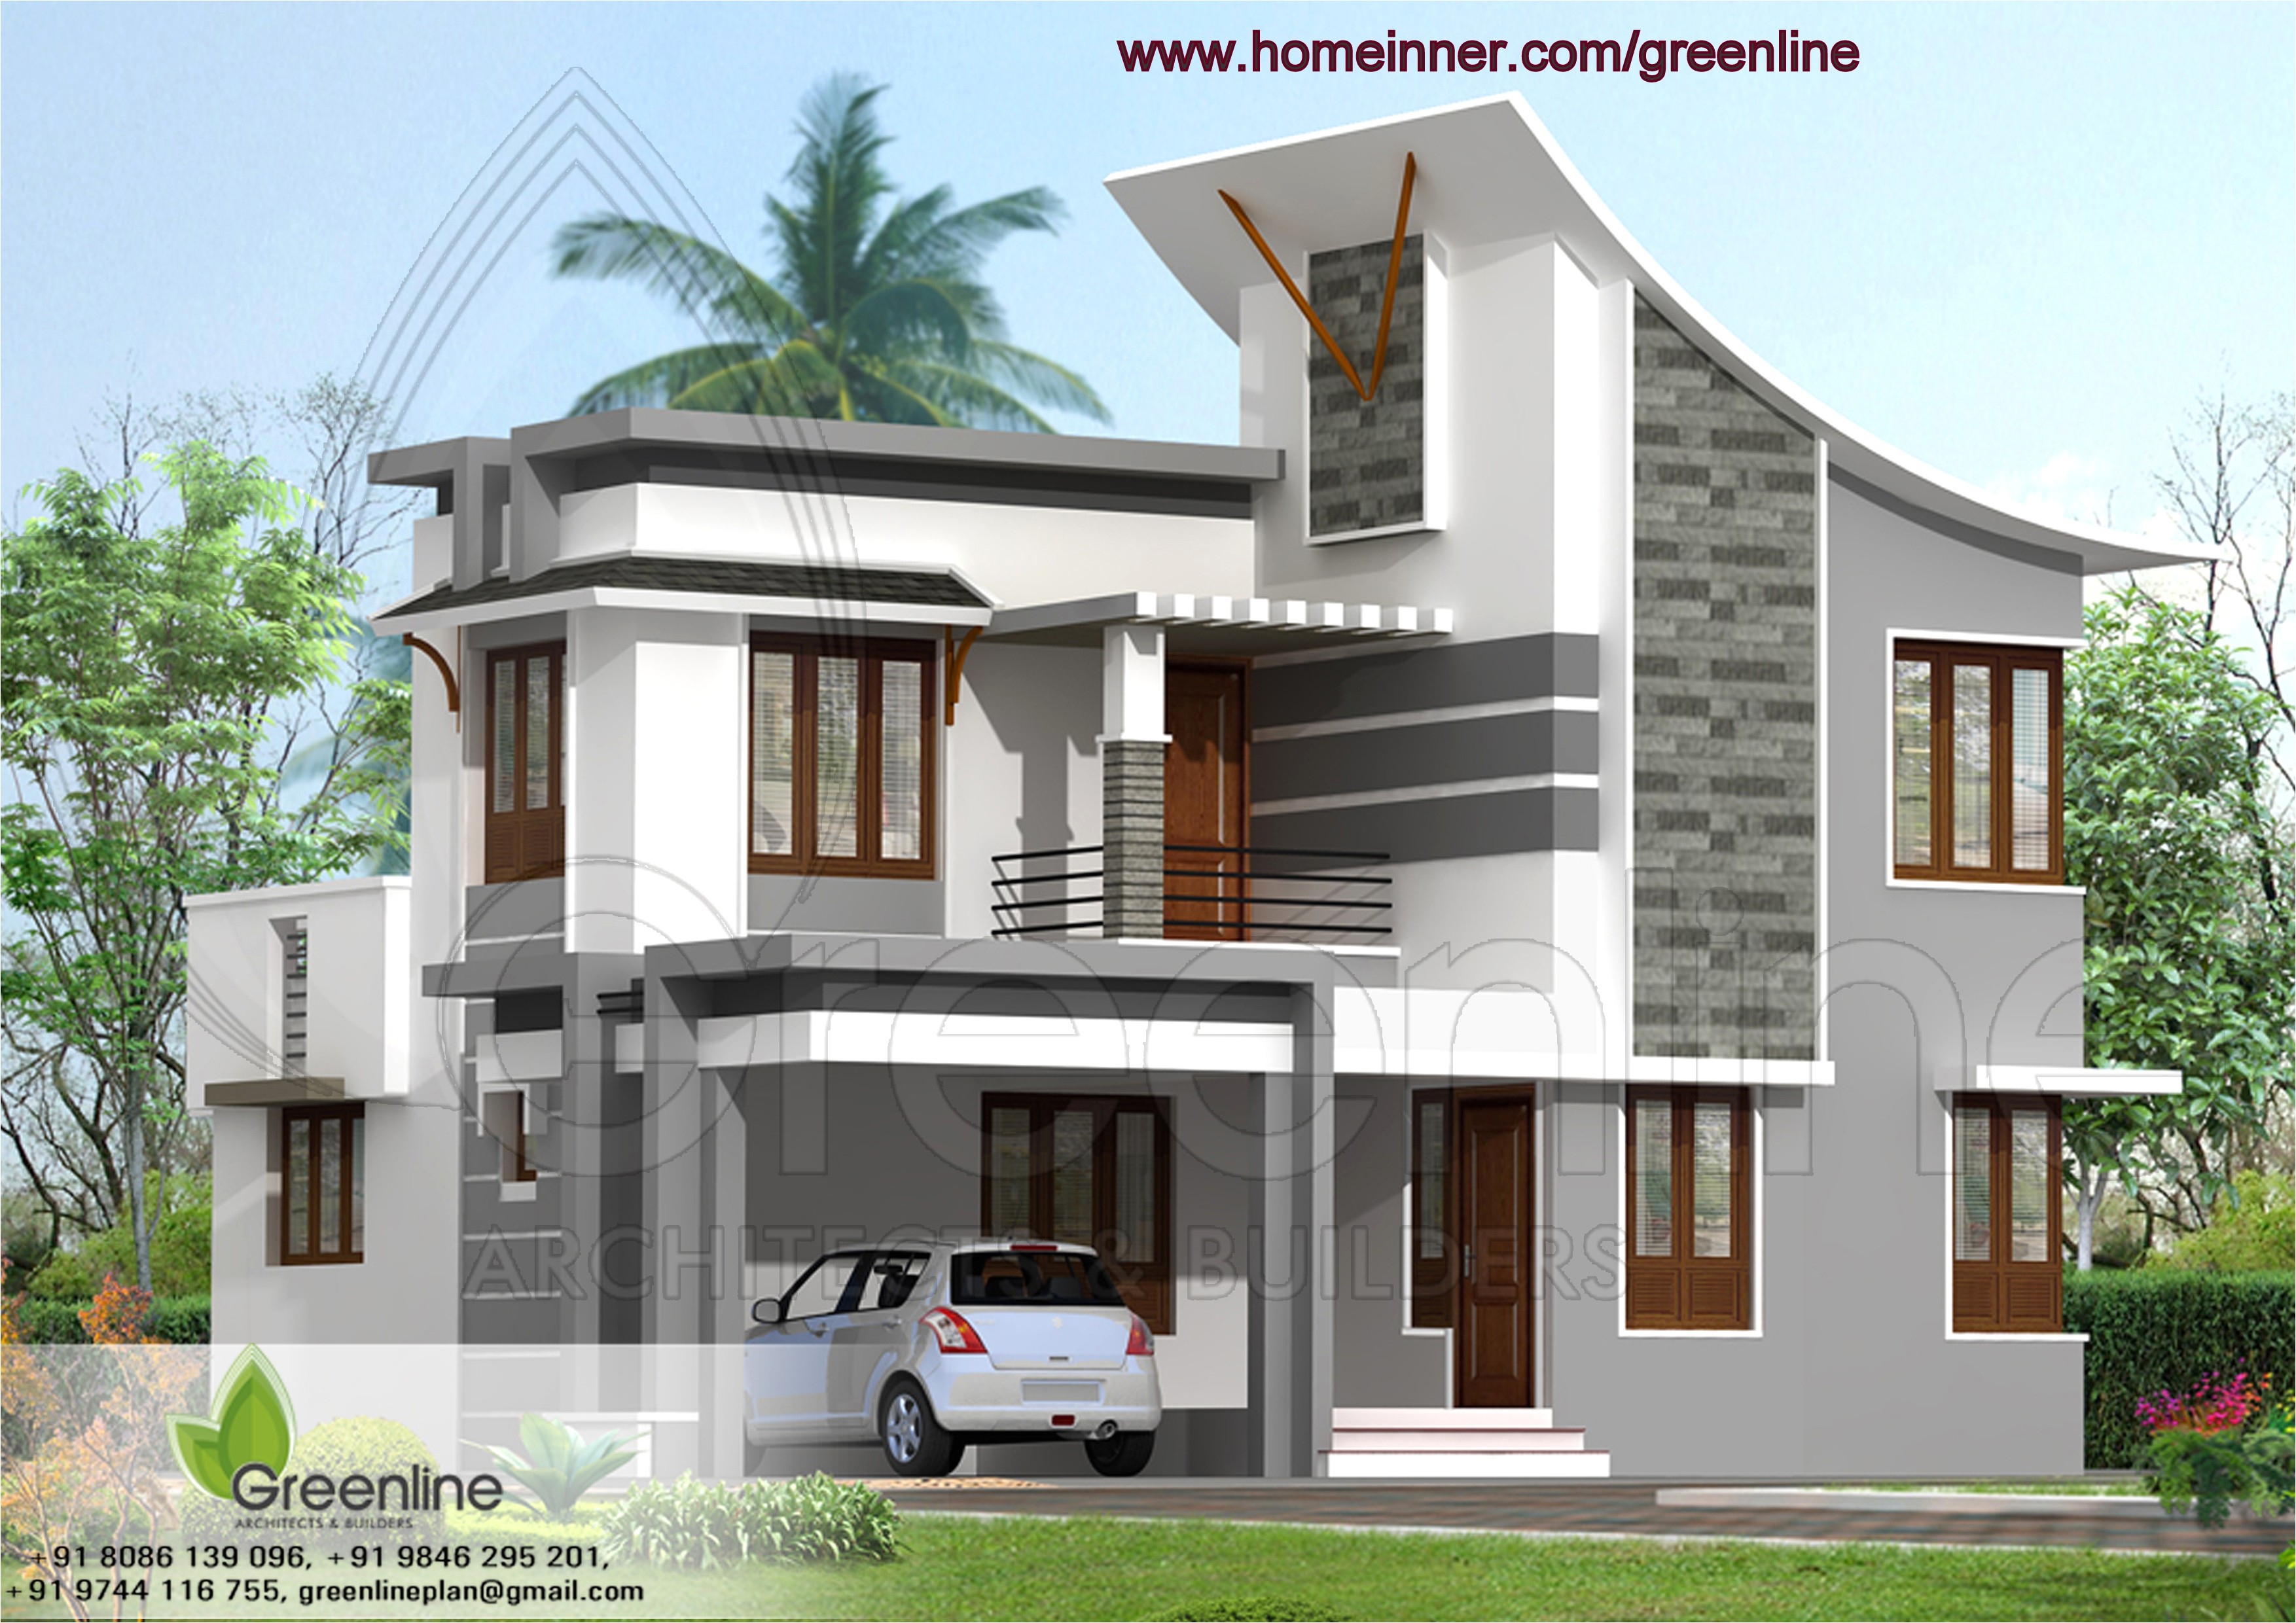 house design indian style plan and elevation